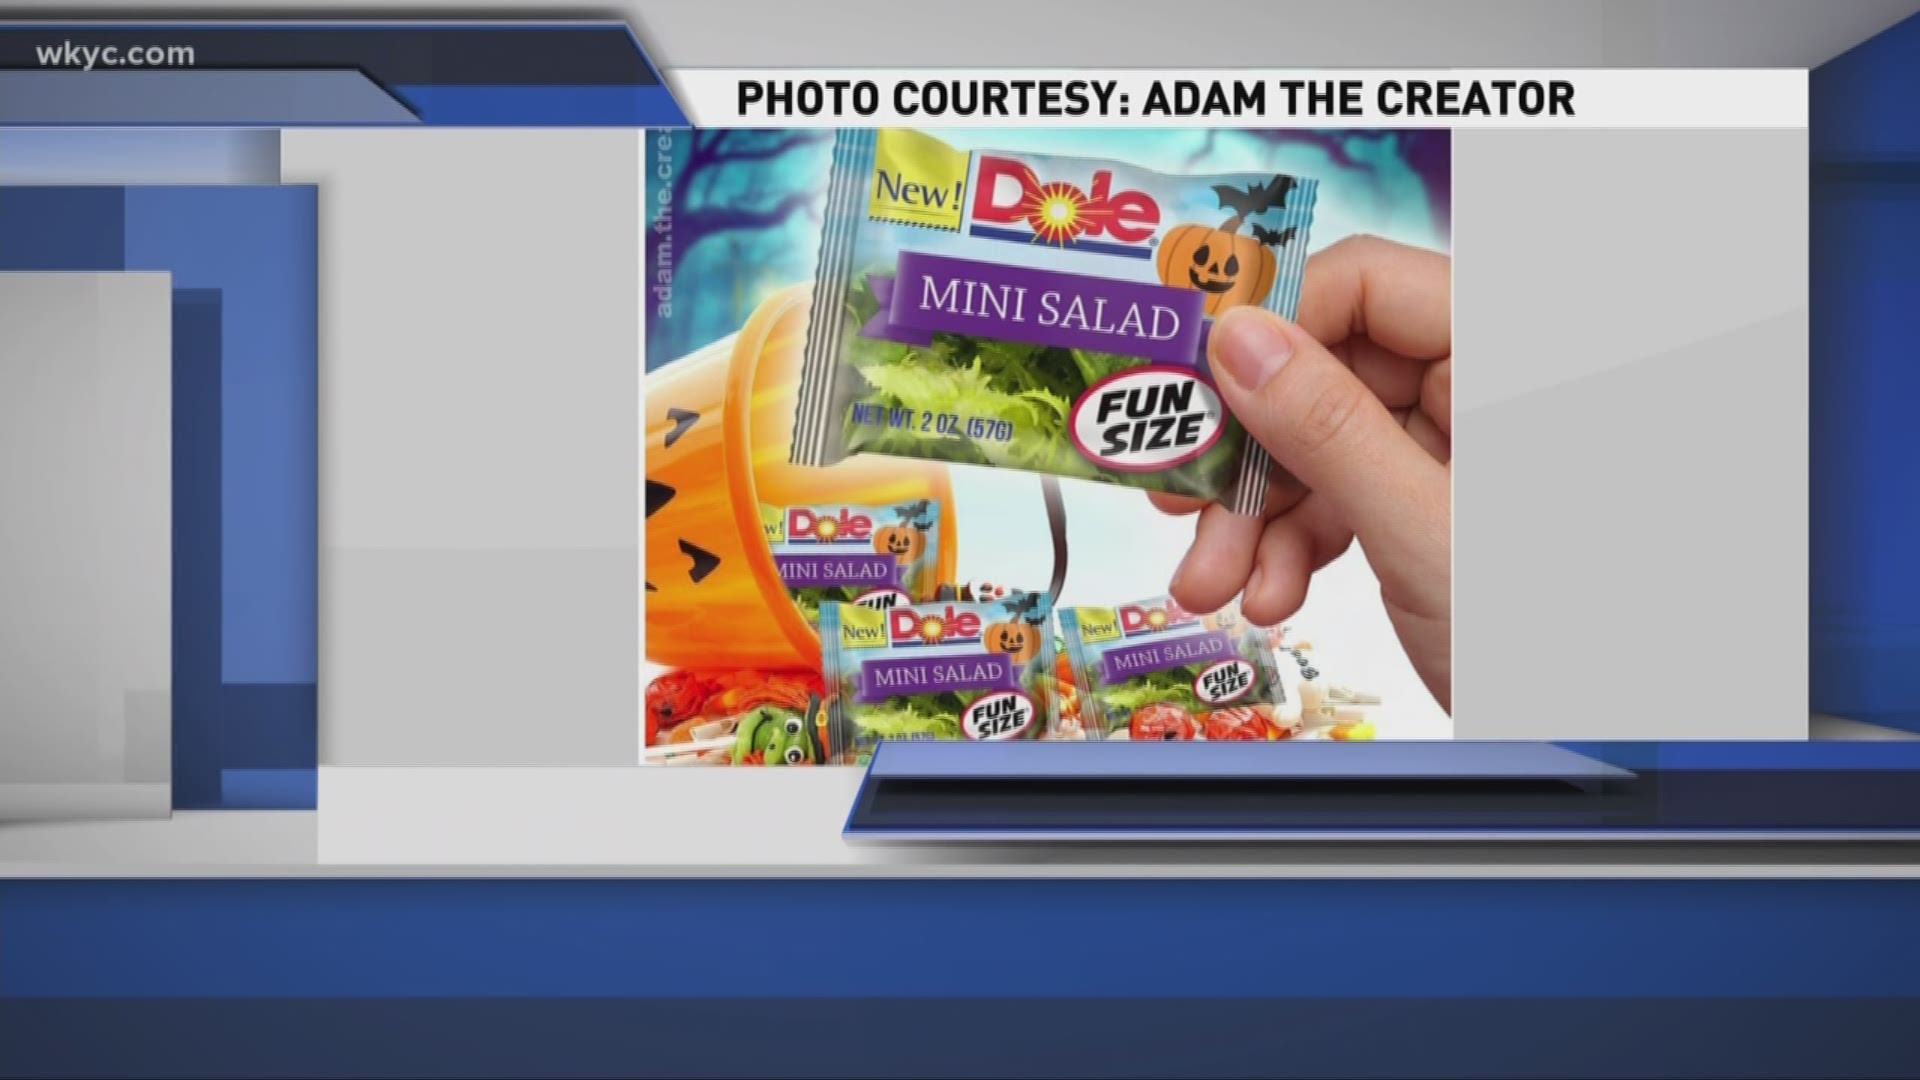 There's a picture swirling around social media that shows Dole mini salad packs. While it's a joke, it's also a jab at houses who give out crummy Halloween snacks to trick-or-treaters.